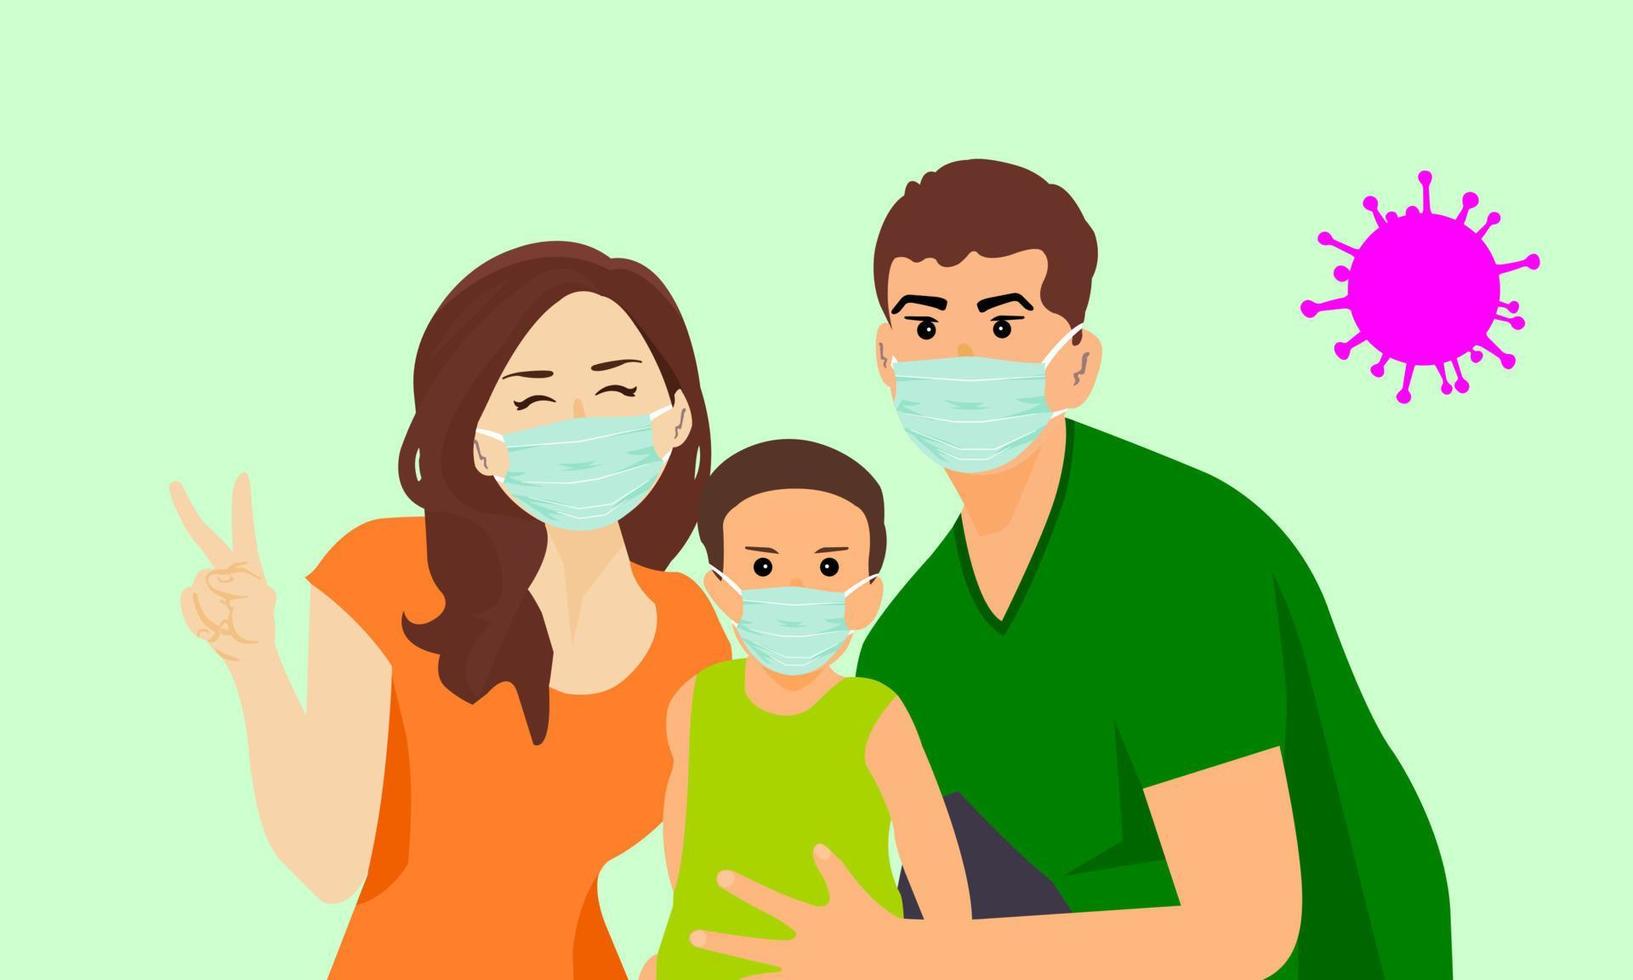 The family wears a mask to prevent the coronavirus outbreak COVID 19. Mother's right hand shows V sign. Happy face.The father's right hand showed signs of protecting the child. vector